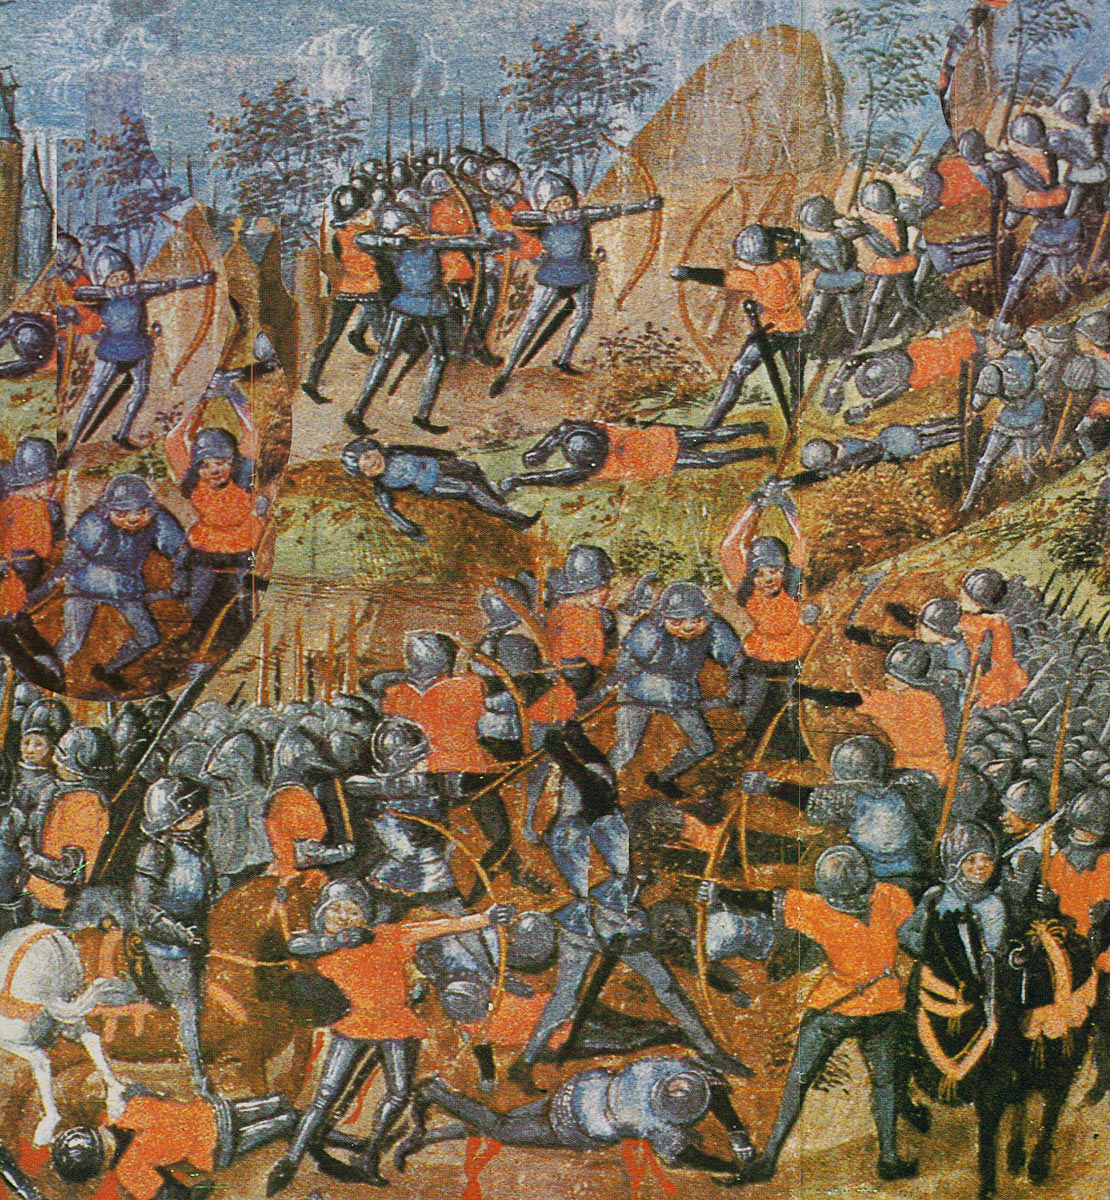 Battle of Barnet on 14th April 1471 in the Wars of the Roses